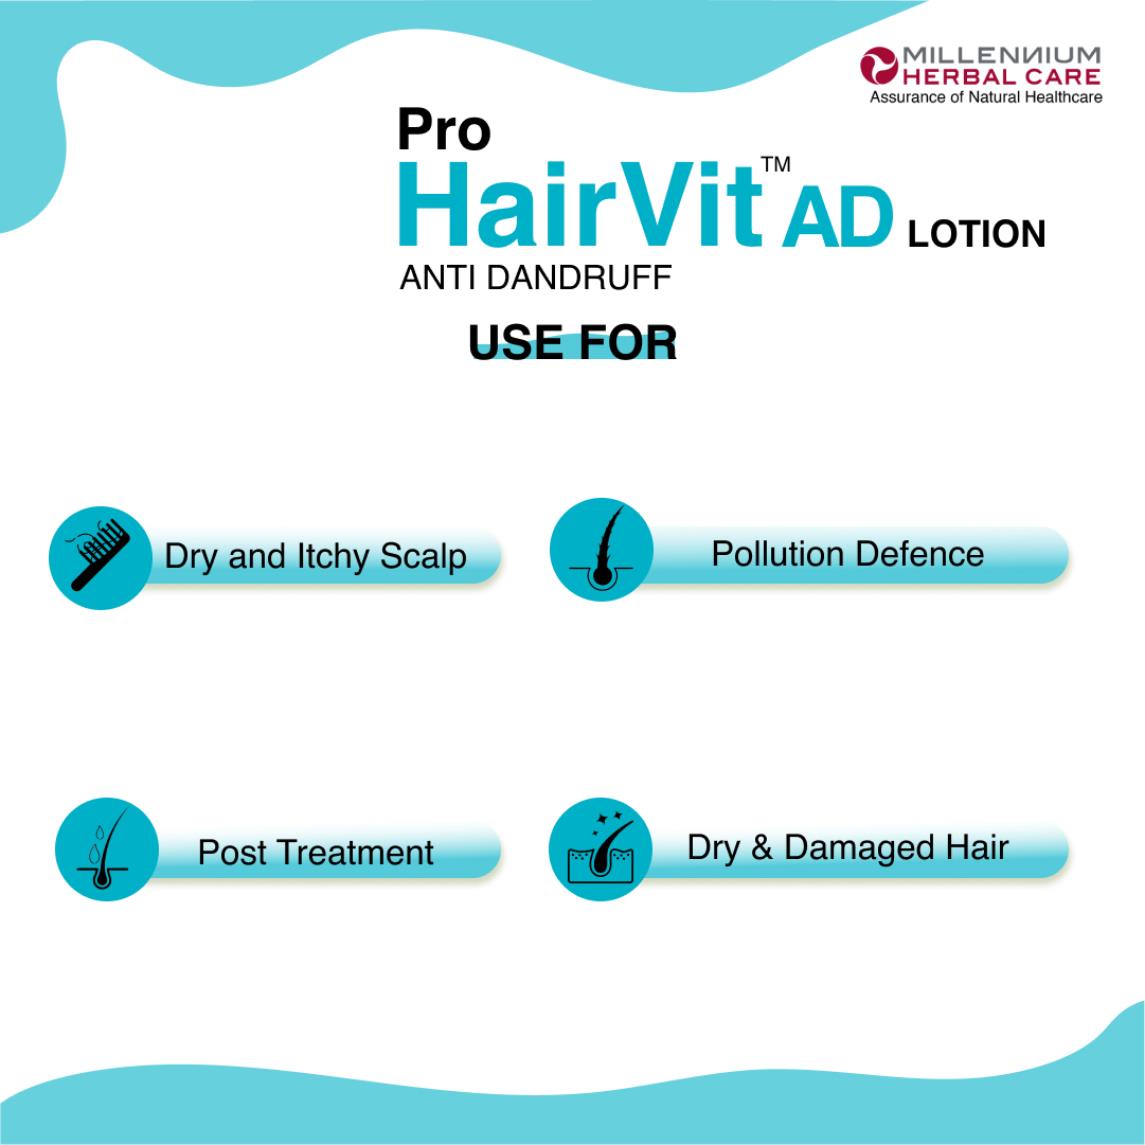 Uses of Pro Hairvit AD Lotion